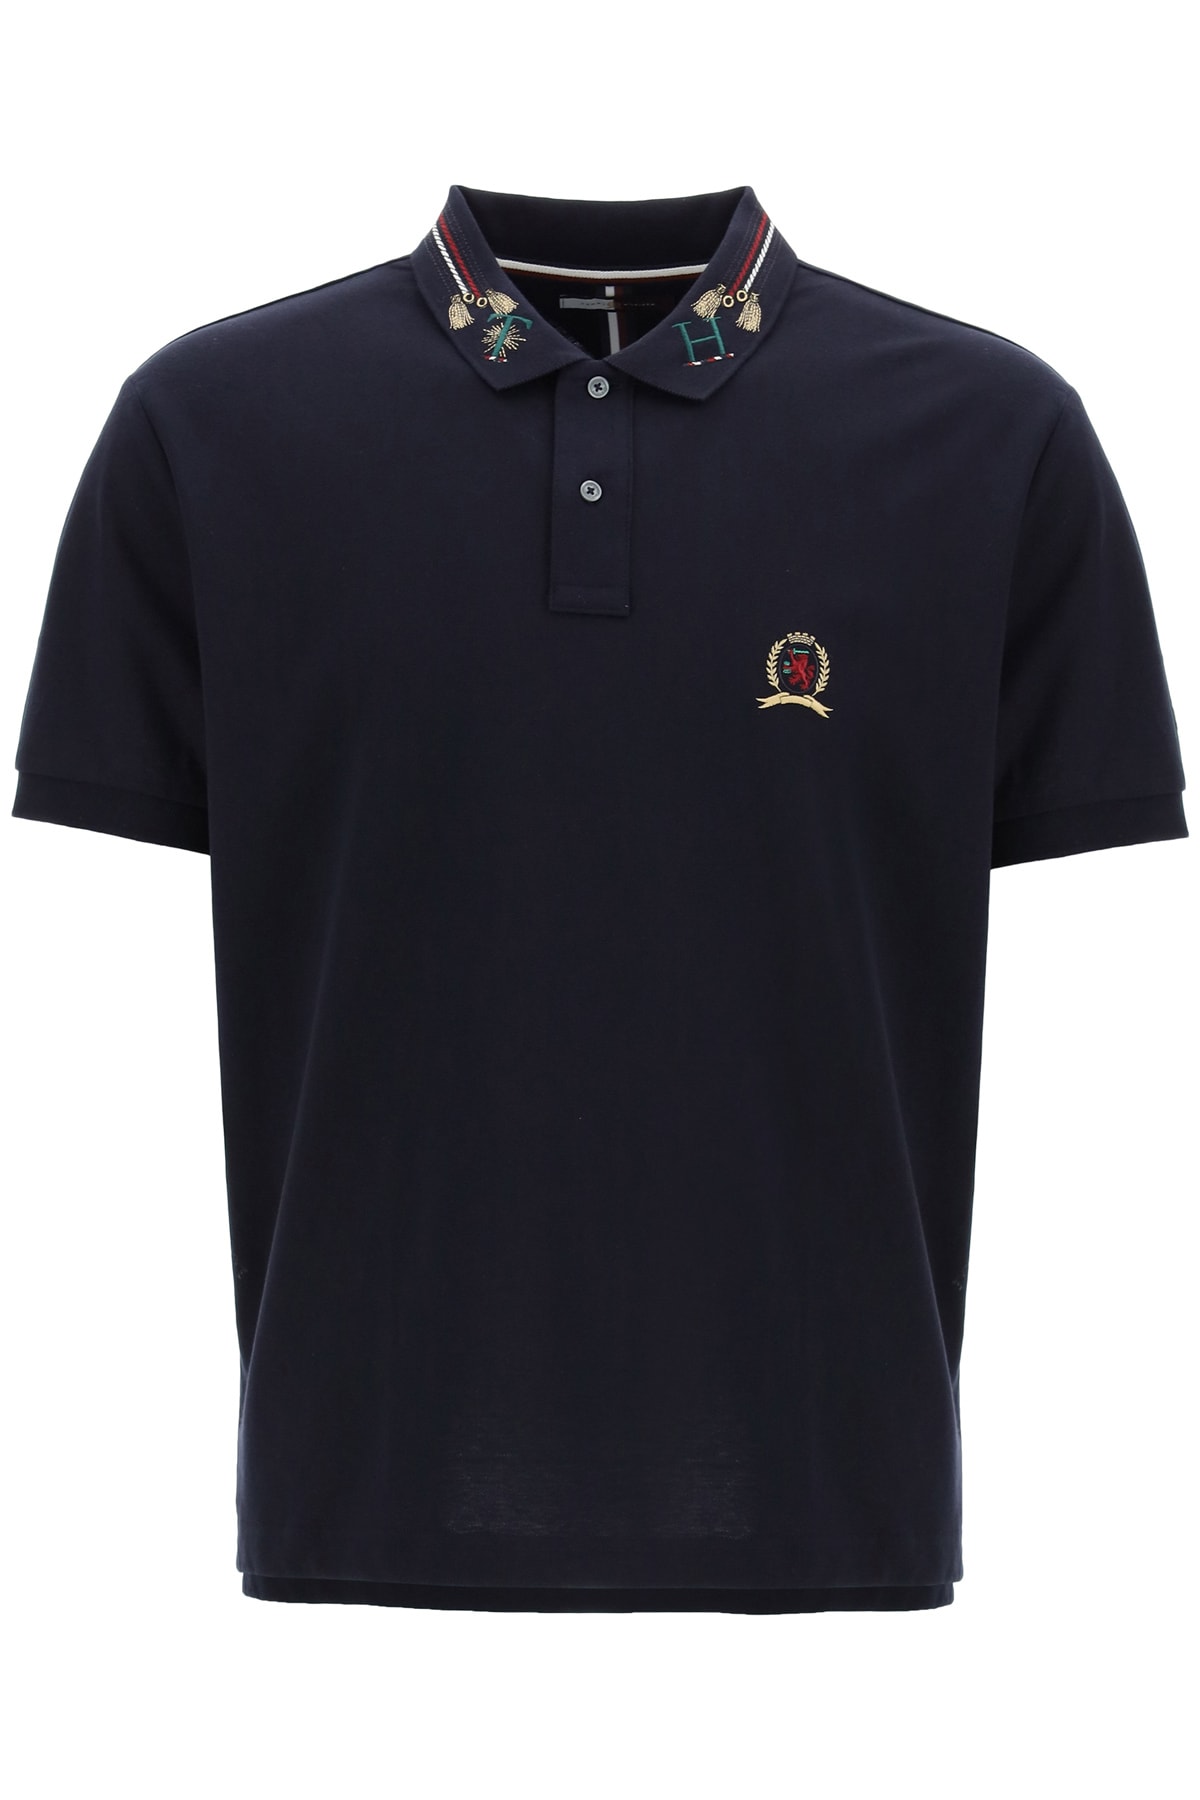 Tommy Hilfiger Polo Shirt With Embroidered Collar